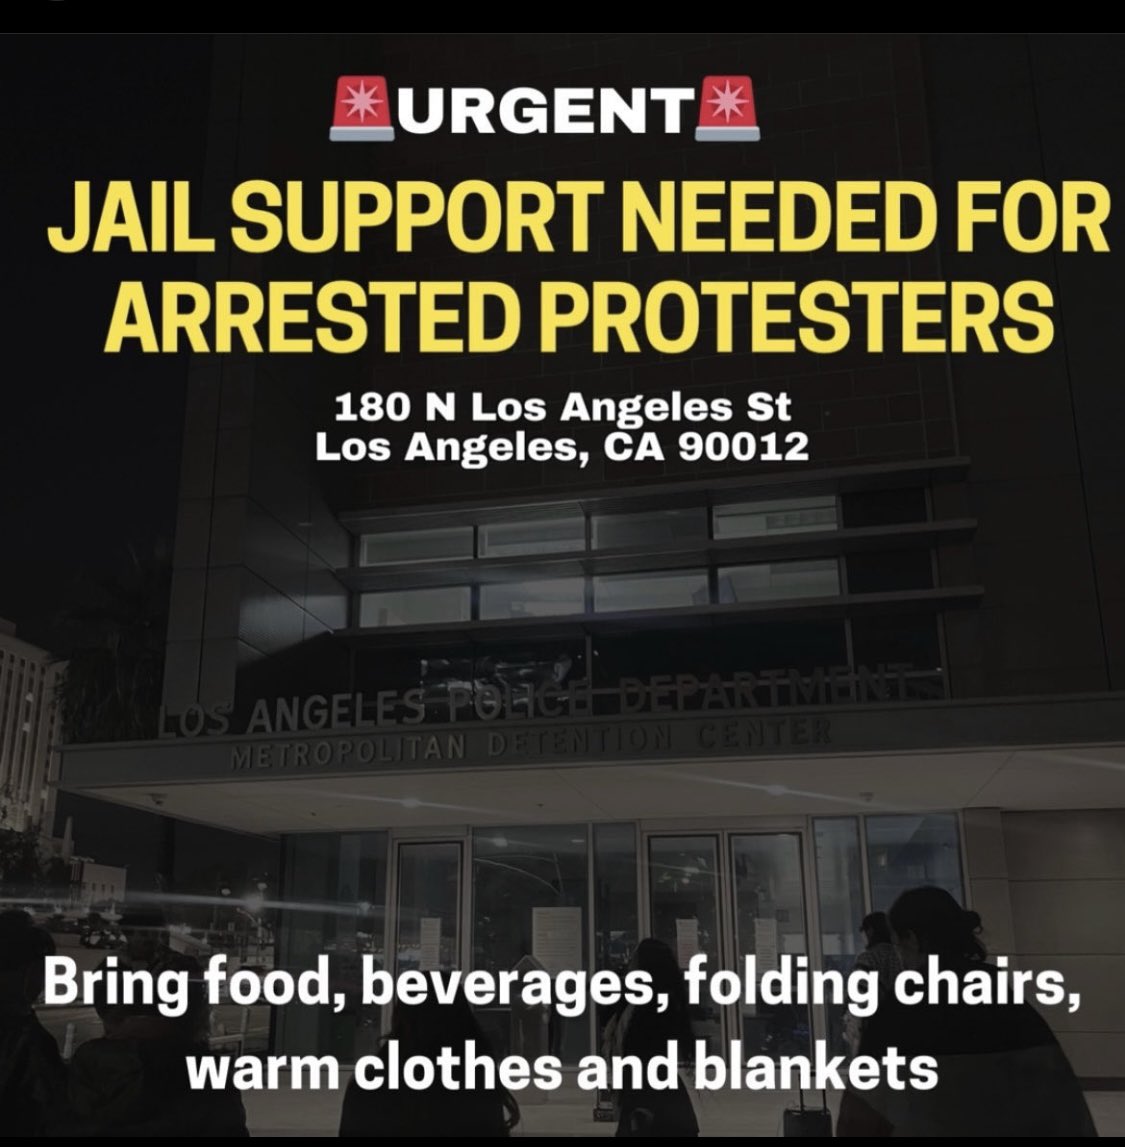 🚨Urgent call from @palyouthmvmt 🚨 Multiple protestors were arrested during our mobilization for Rafah! Join us NOW to demand their release. We are calling on community members to show up ￼ 📍180 N Los Angeles St, Los Angeles CA, 90012